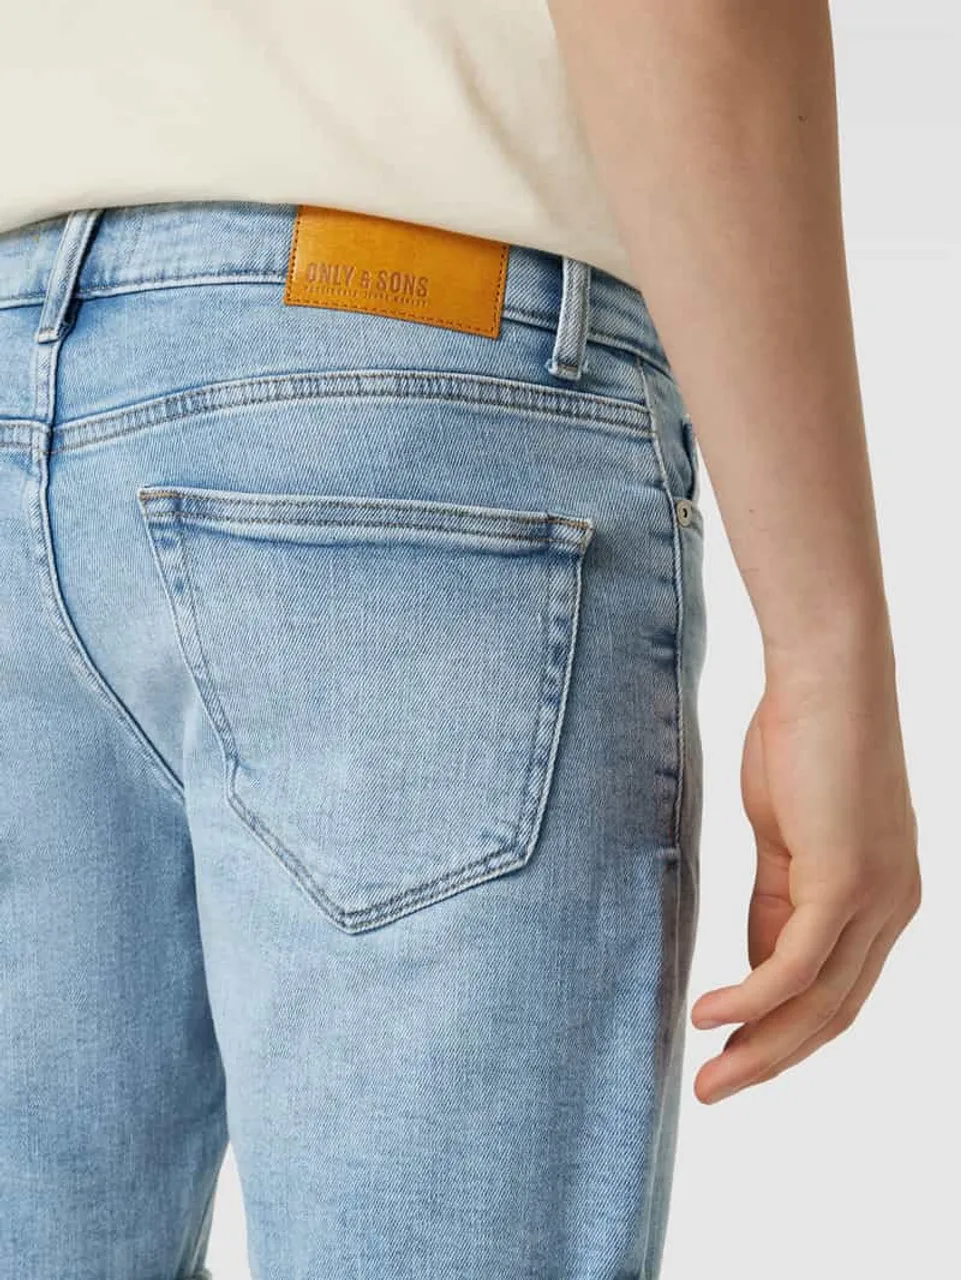 Only & Sons Jeansshorts mit Label-Patch Modell 'PLY' in Jeansblau